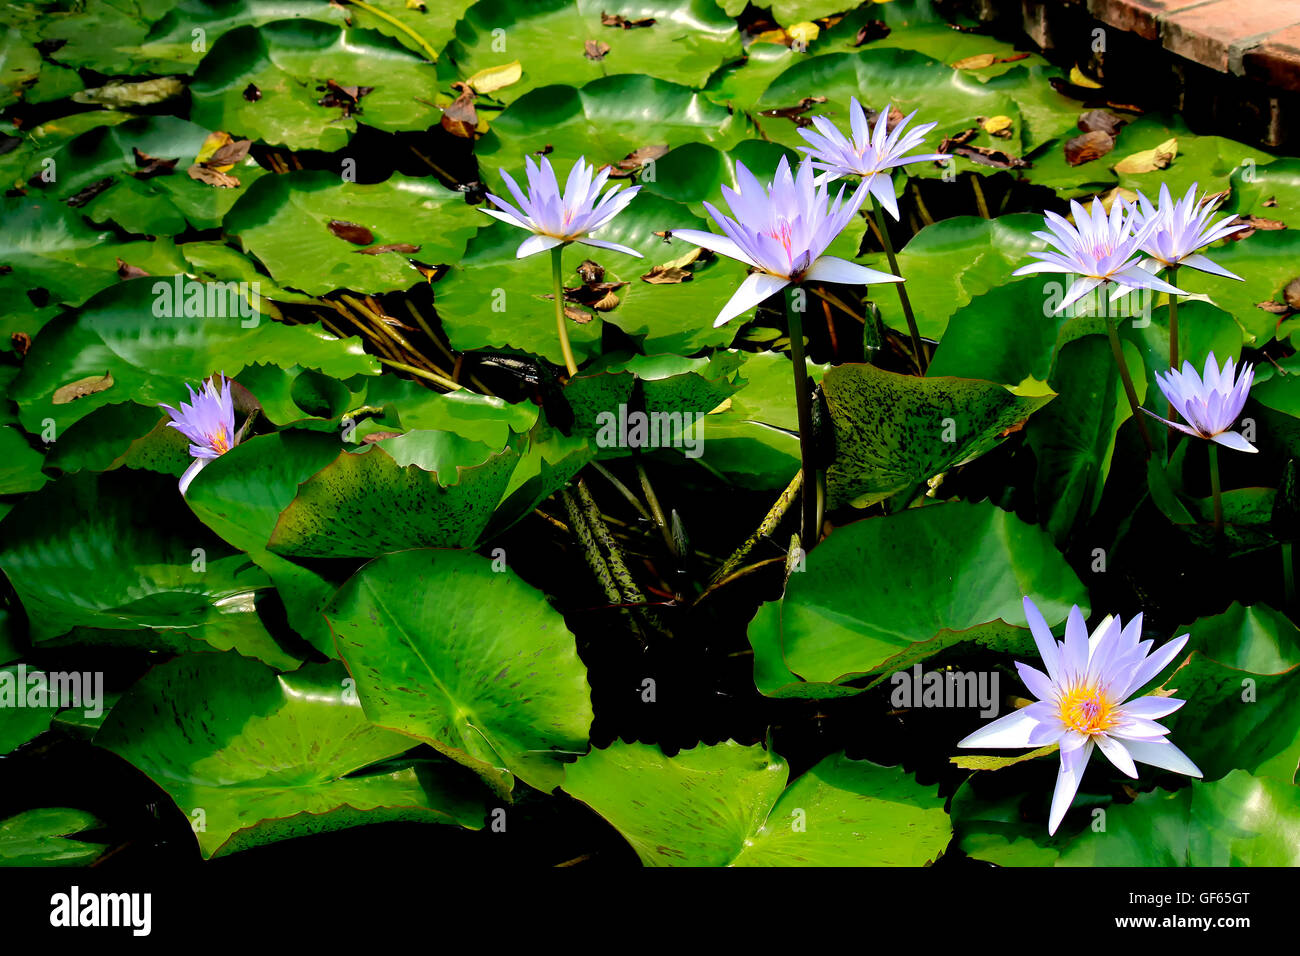 Water lily blooming in pond Stock Photo